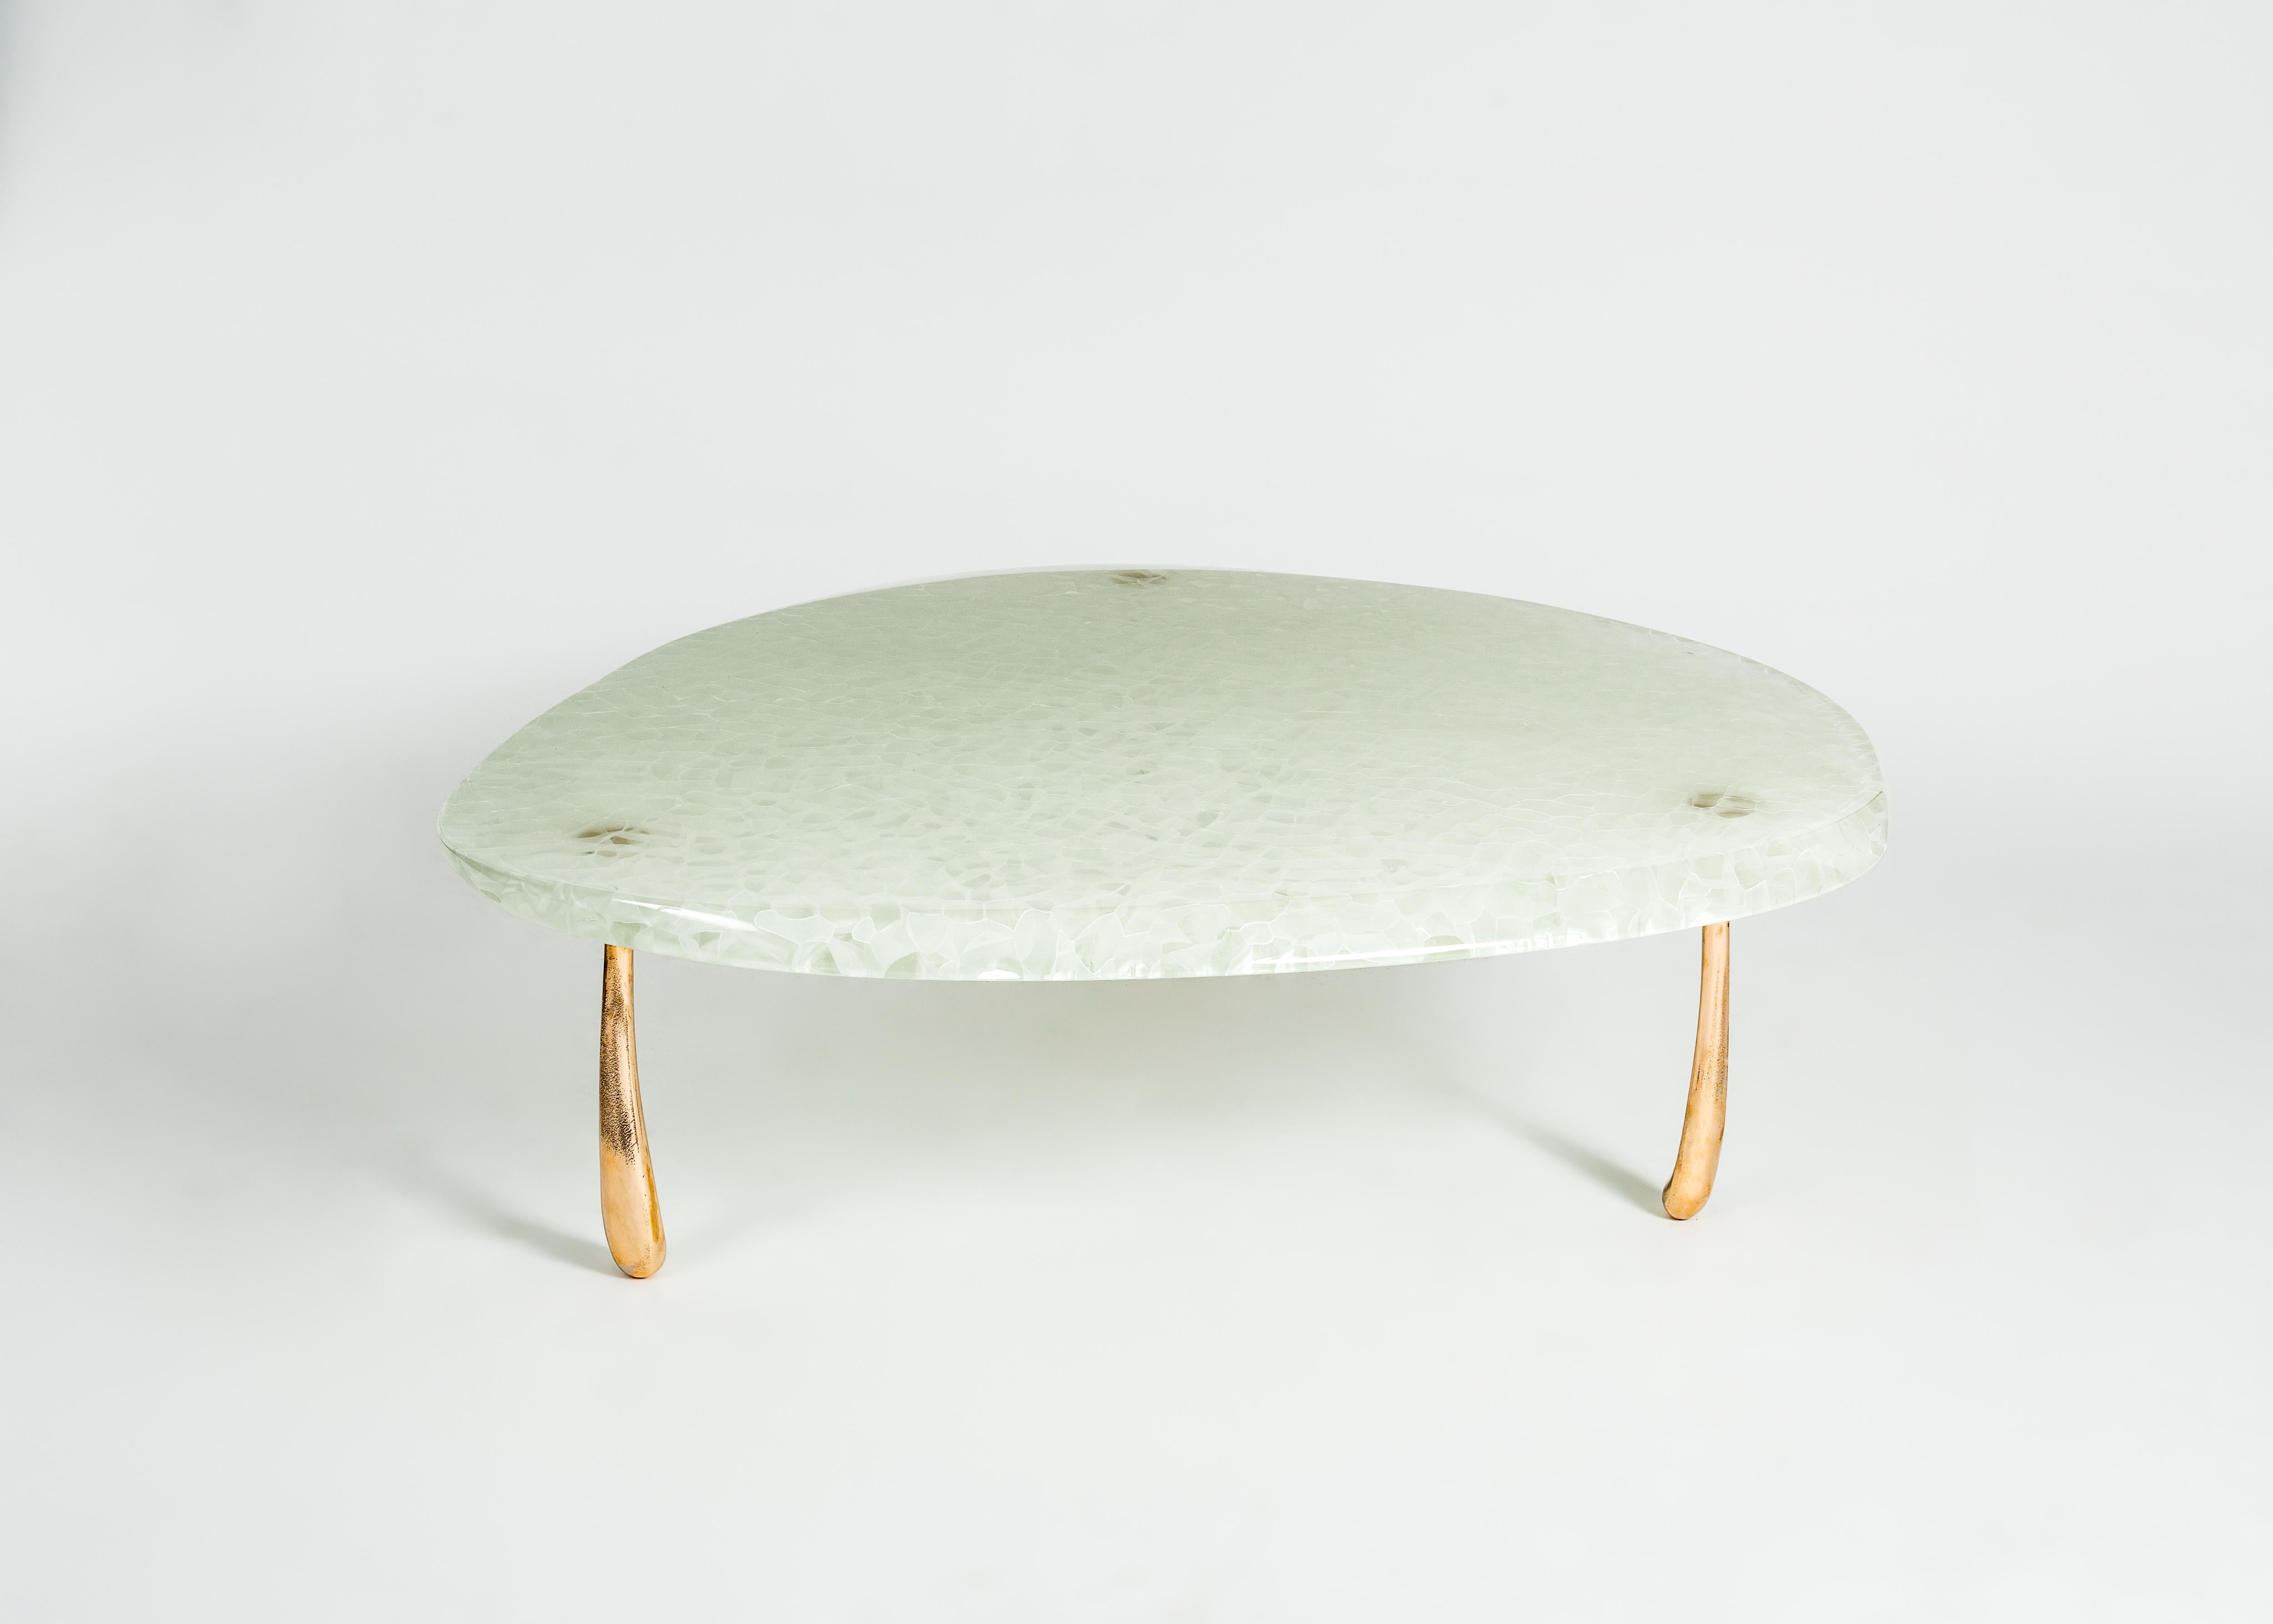 Mura low table is created in collaboration with Toronto-based glass design and fabrication atelier Jeff Goodman Studio (JGS). It pairs STACKLAB’s signature solid-bronze Jupiter leg castings with a droplet-shaped top of kiln-fused Temple glass. The